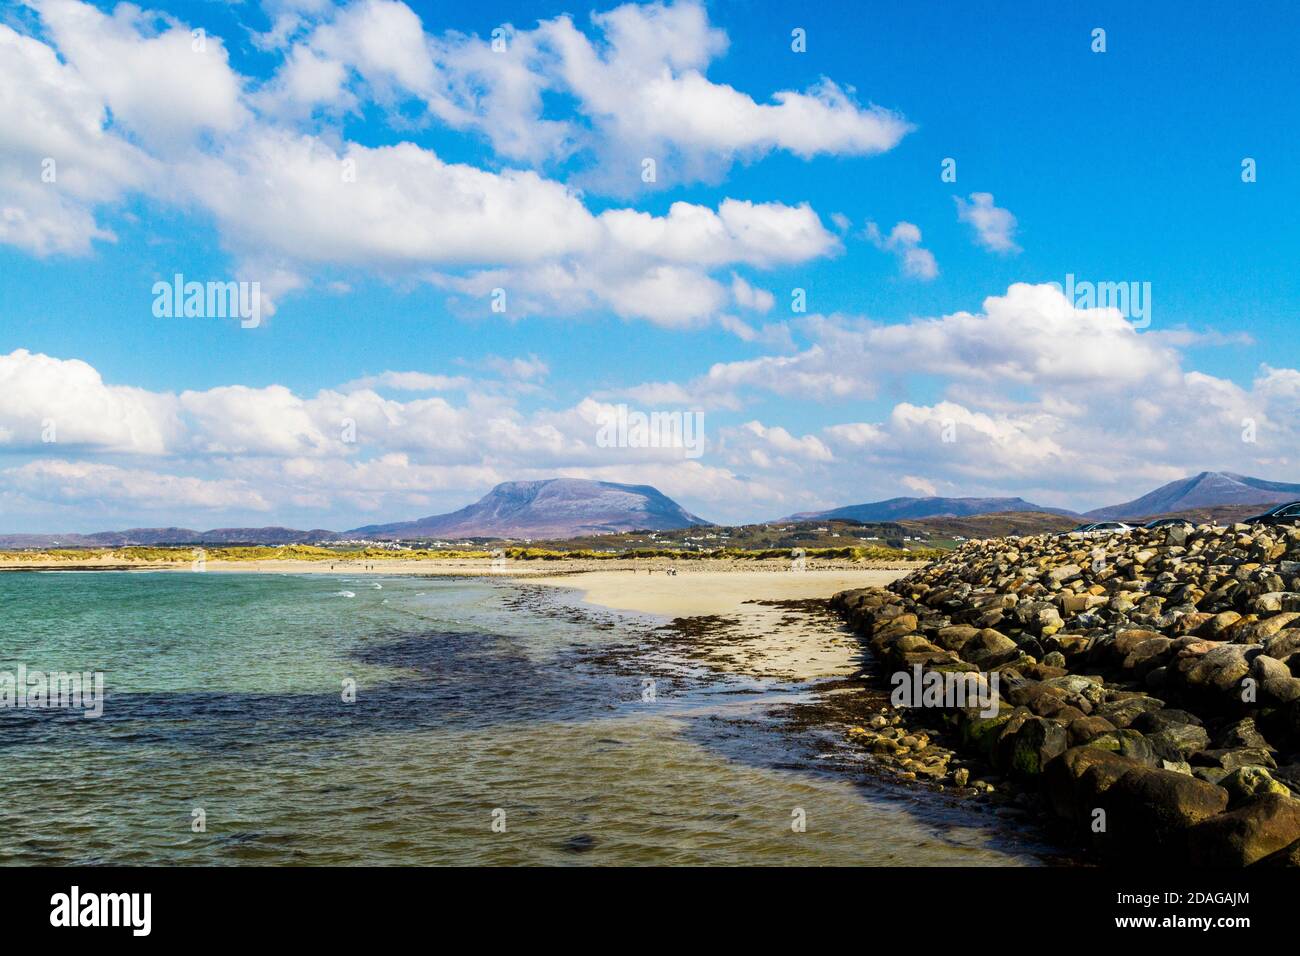 Donegal: Magheraroarty Beach and Muckish mountain, Co. Donegal, Ireland Stock Photo